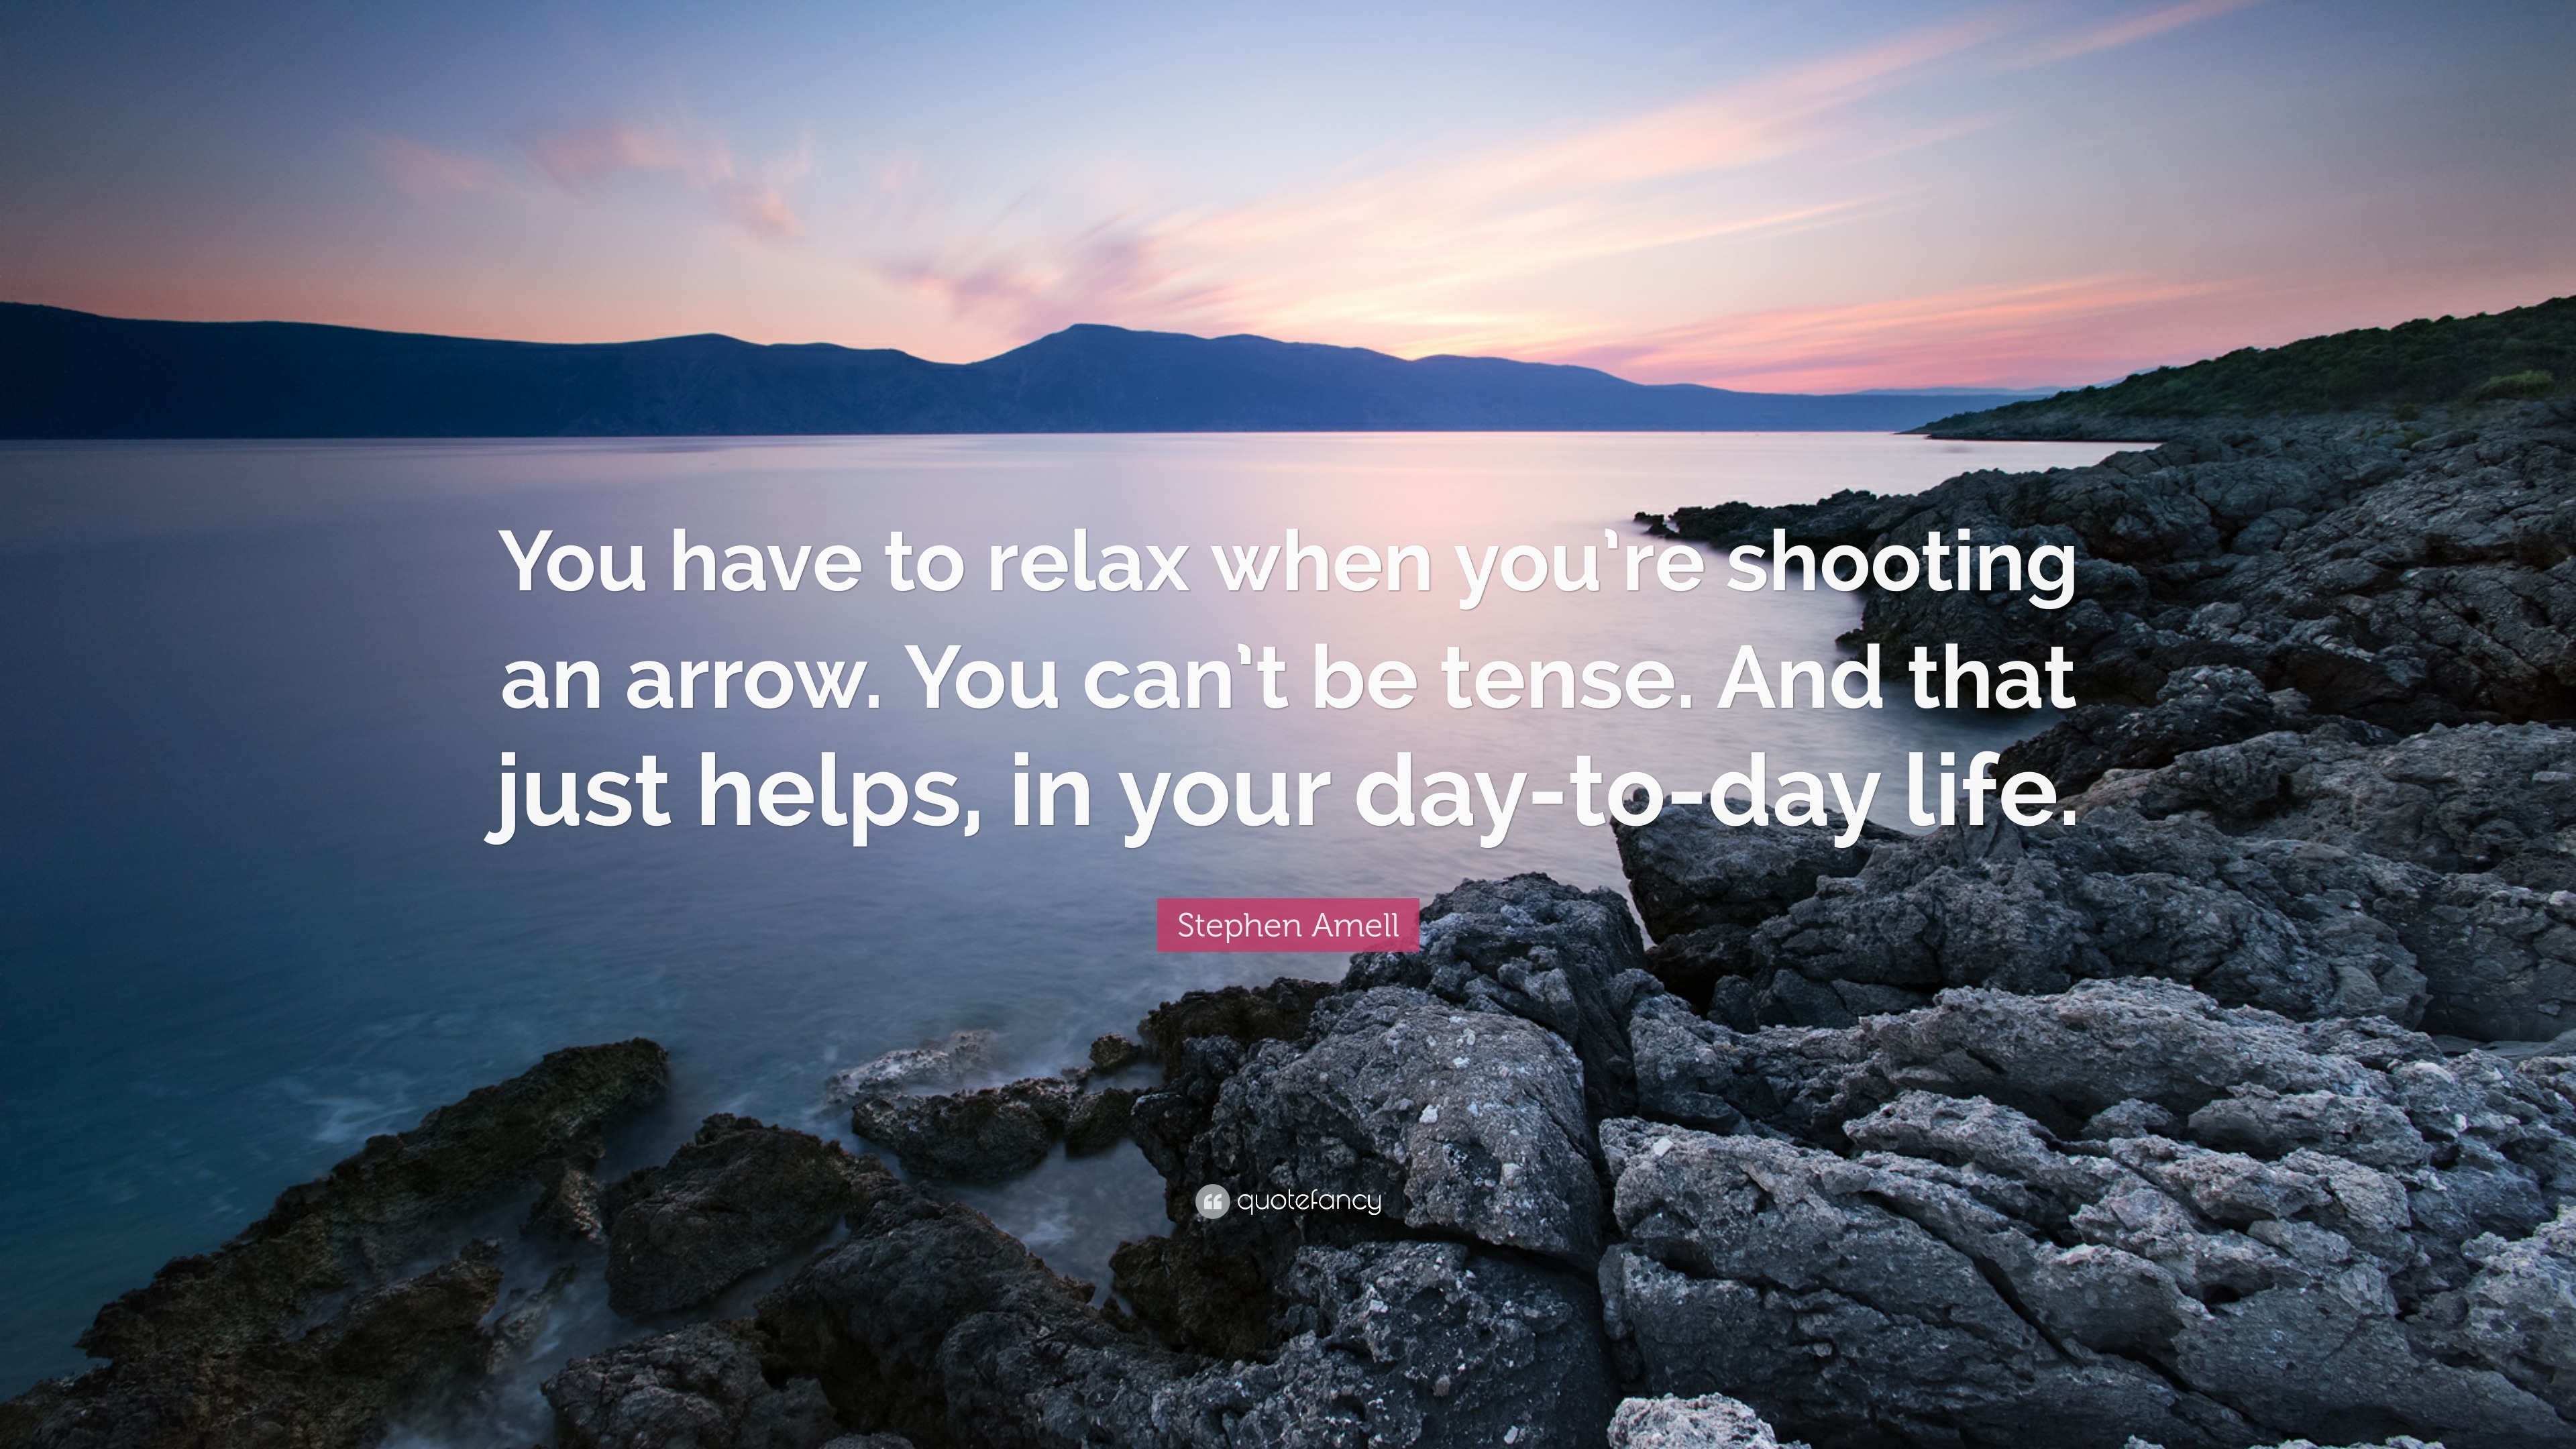 Stephen Amell Quote You Have To Relax When You Re Shooting An Arrow You Can T